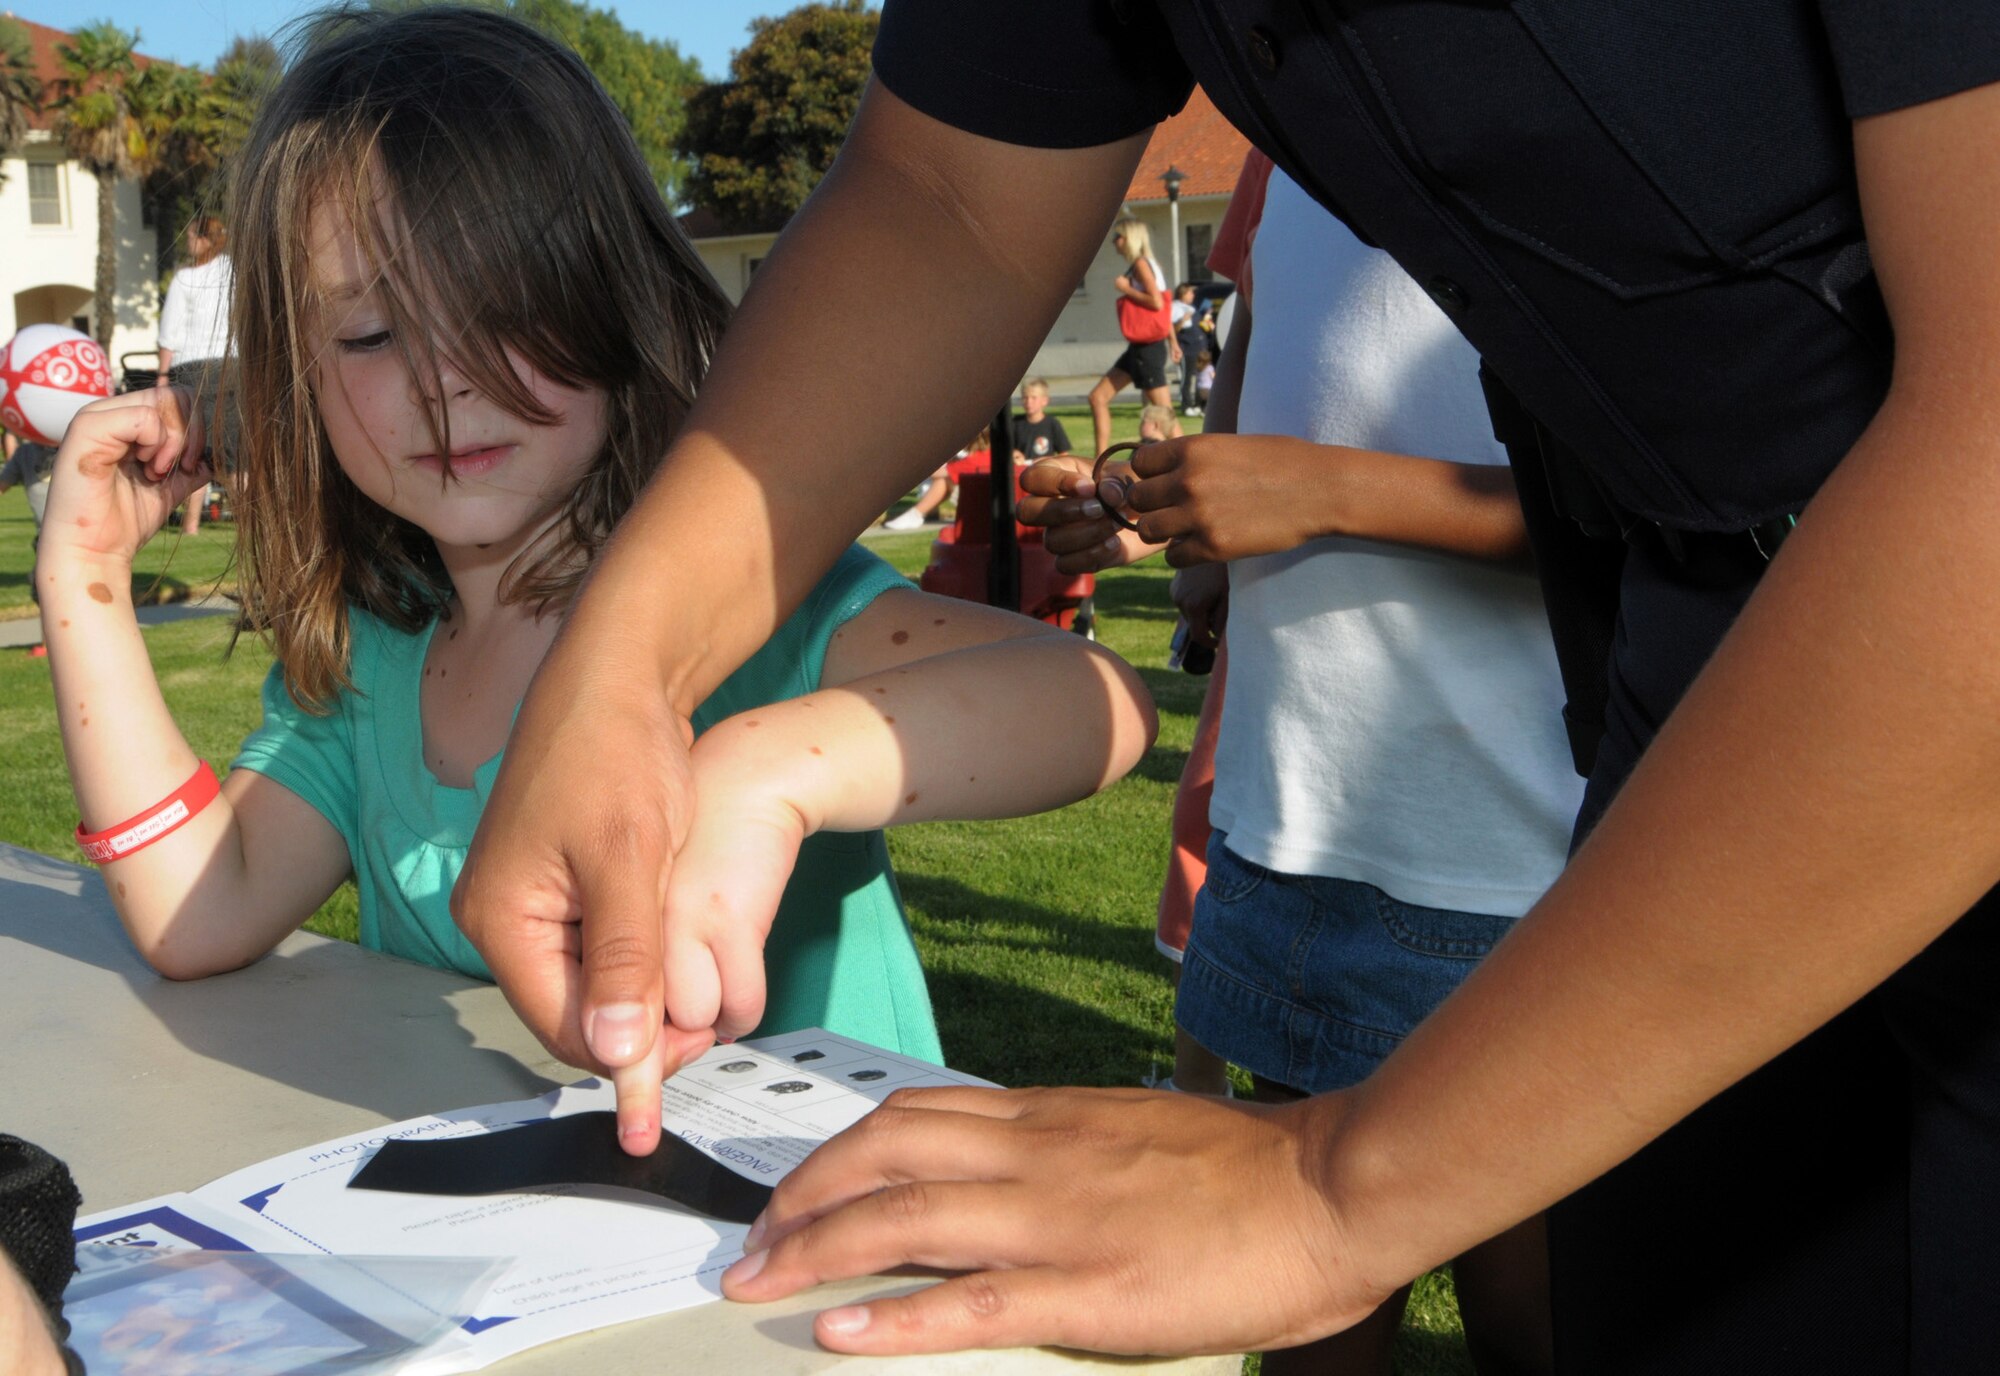 Family Member Mackenzie Fox gets finger printed at the National Night Out event at Fort MacArthur, Aug. 4. Families gathered to enjoy food, meet Mc Gruff the Crime Dog and local fire department reps, and other activities in observance of the event where neighborhoods across the country take back the night from crime.  (Photo by Joe Juarez)